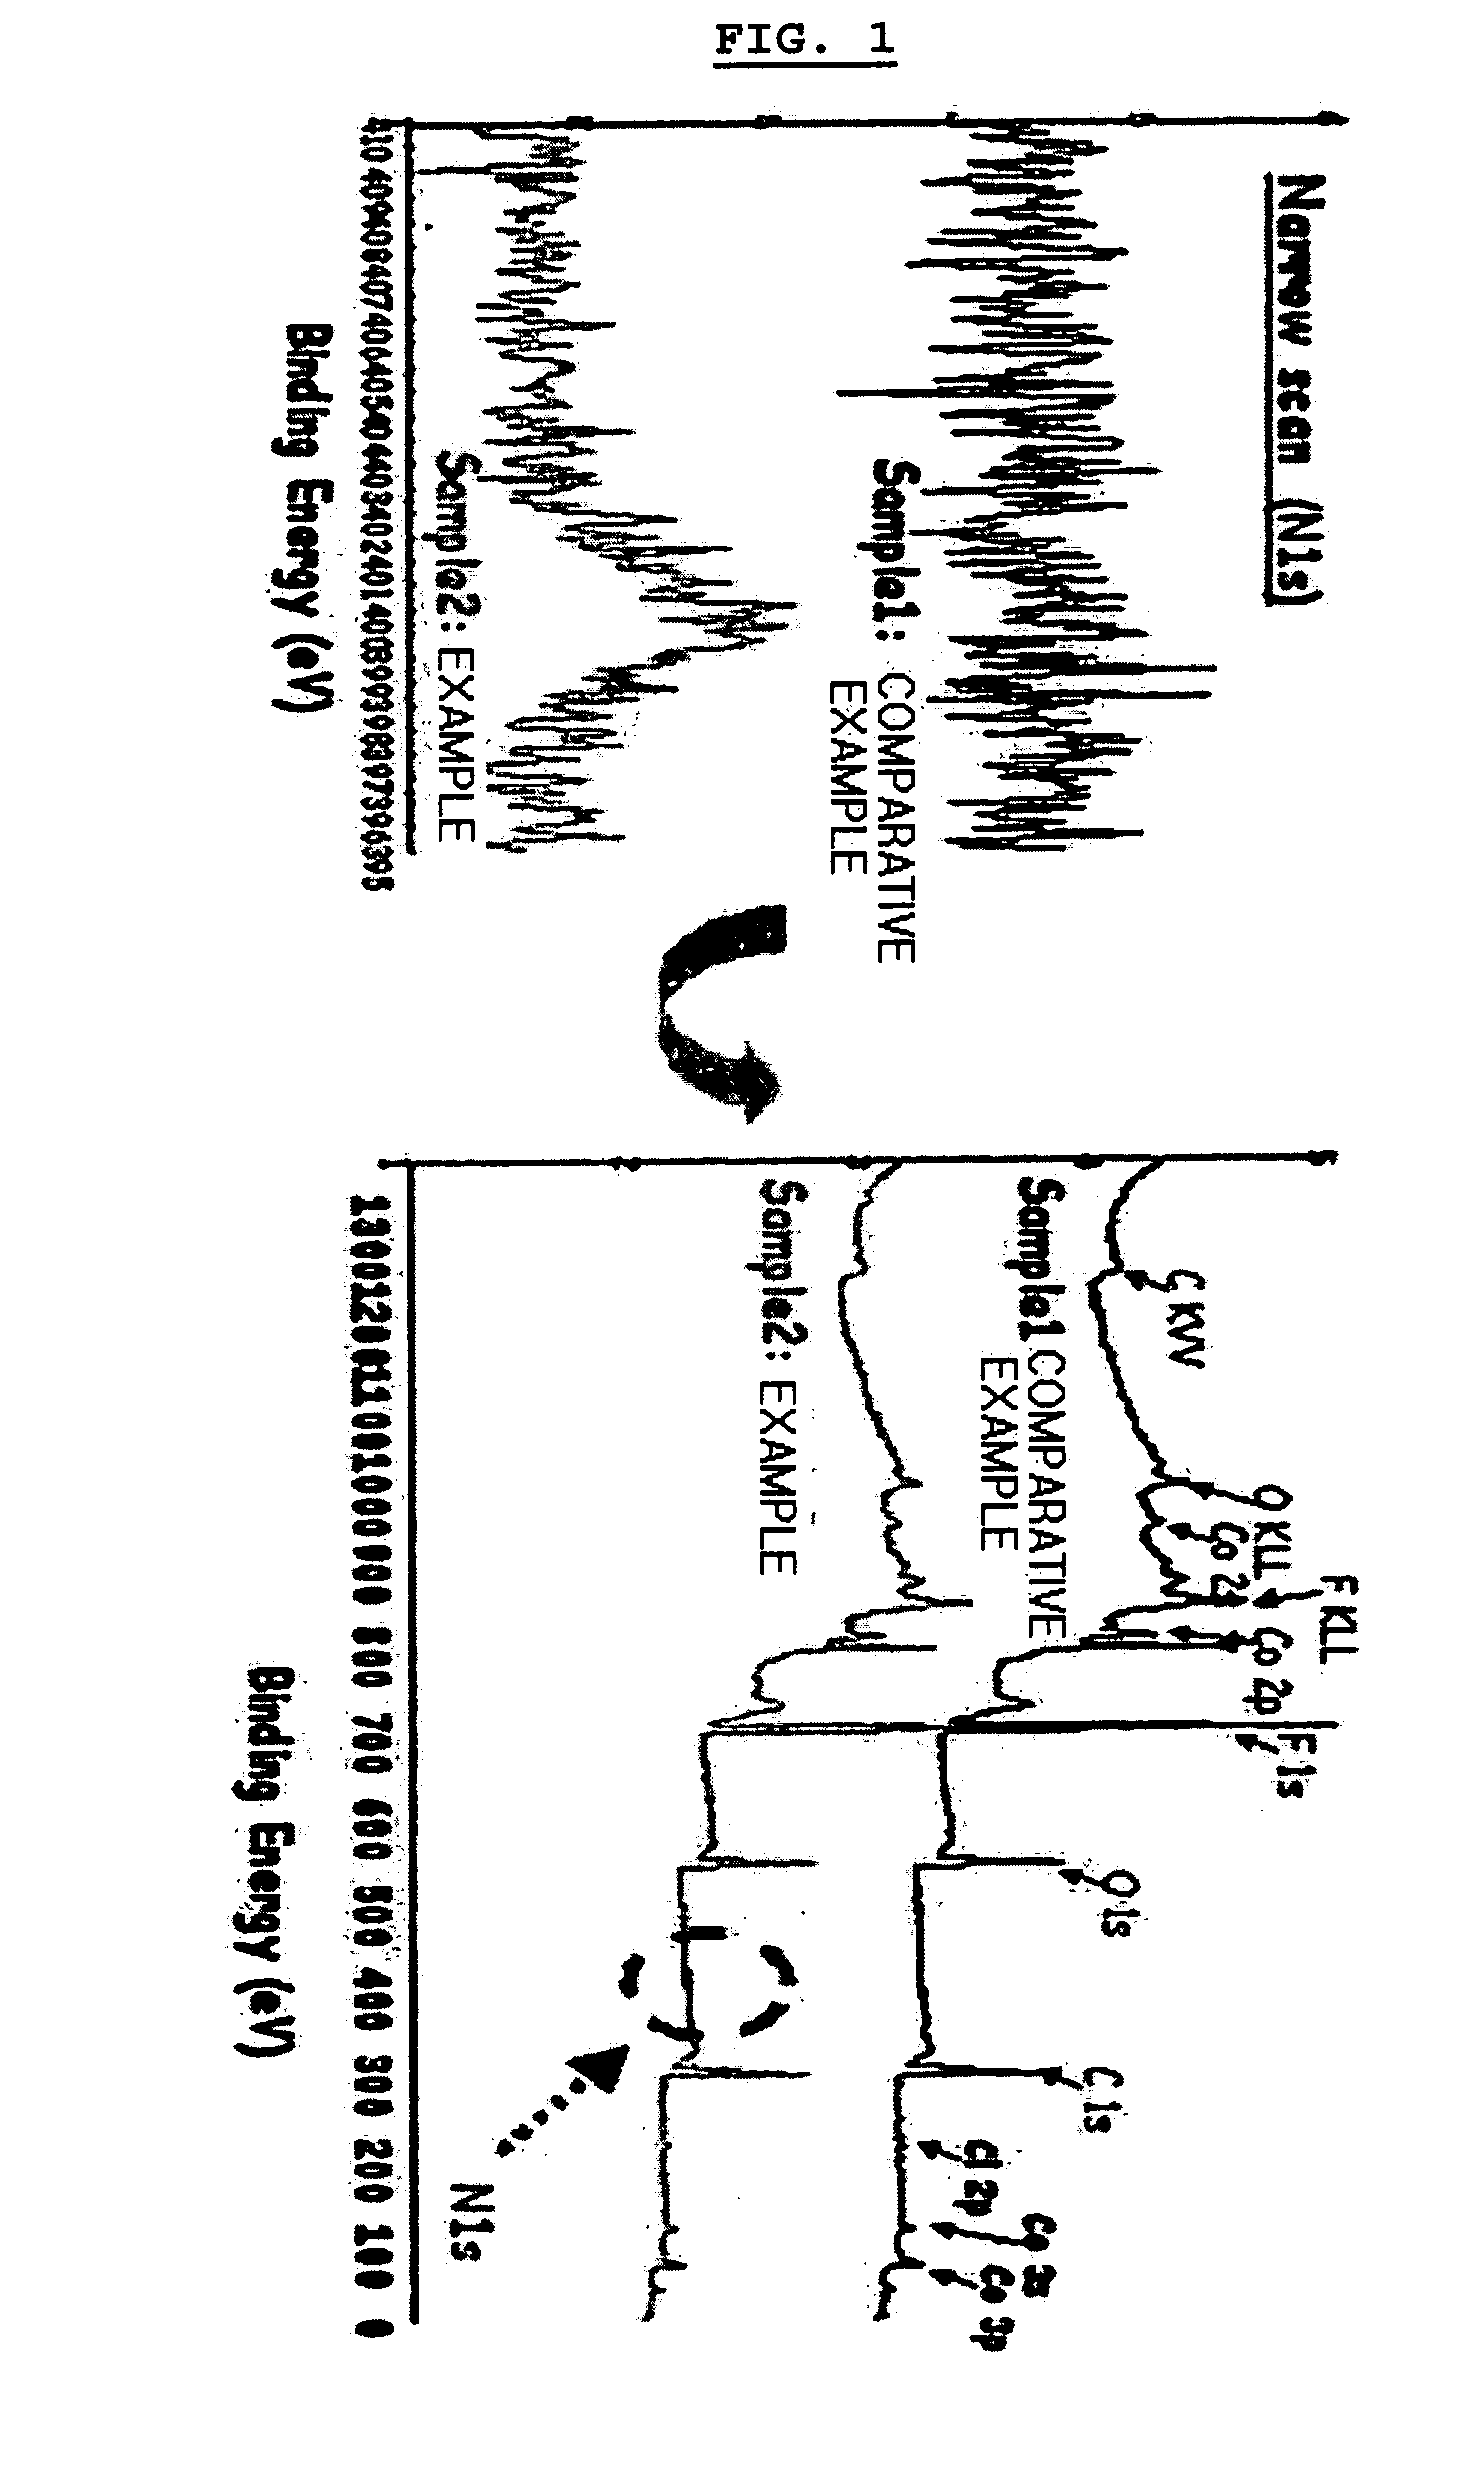 Electrochemical device comprising aliphatic mono-nitrile compound